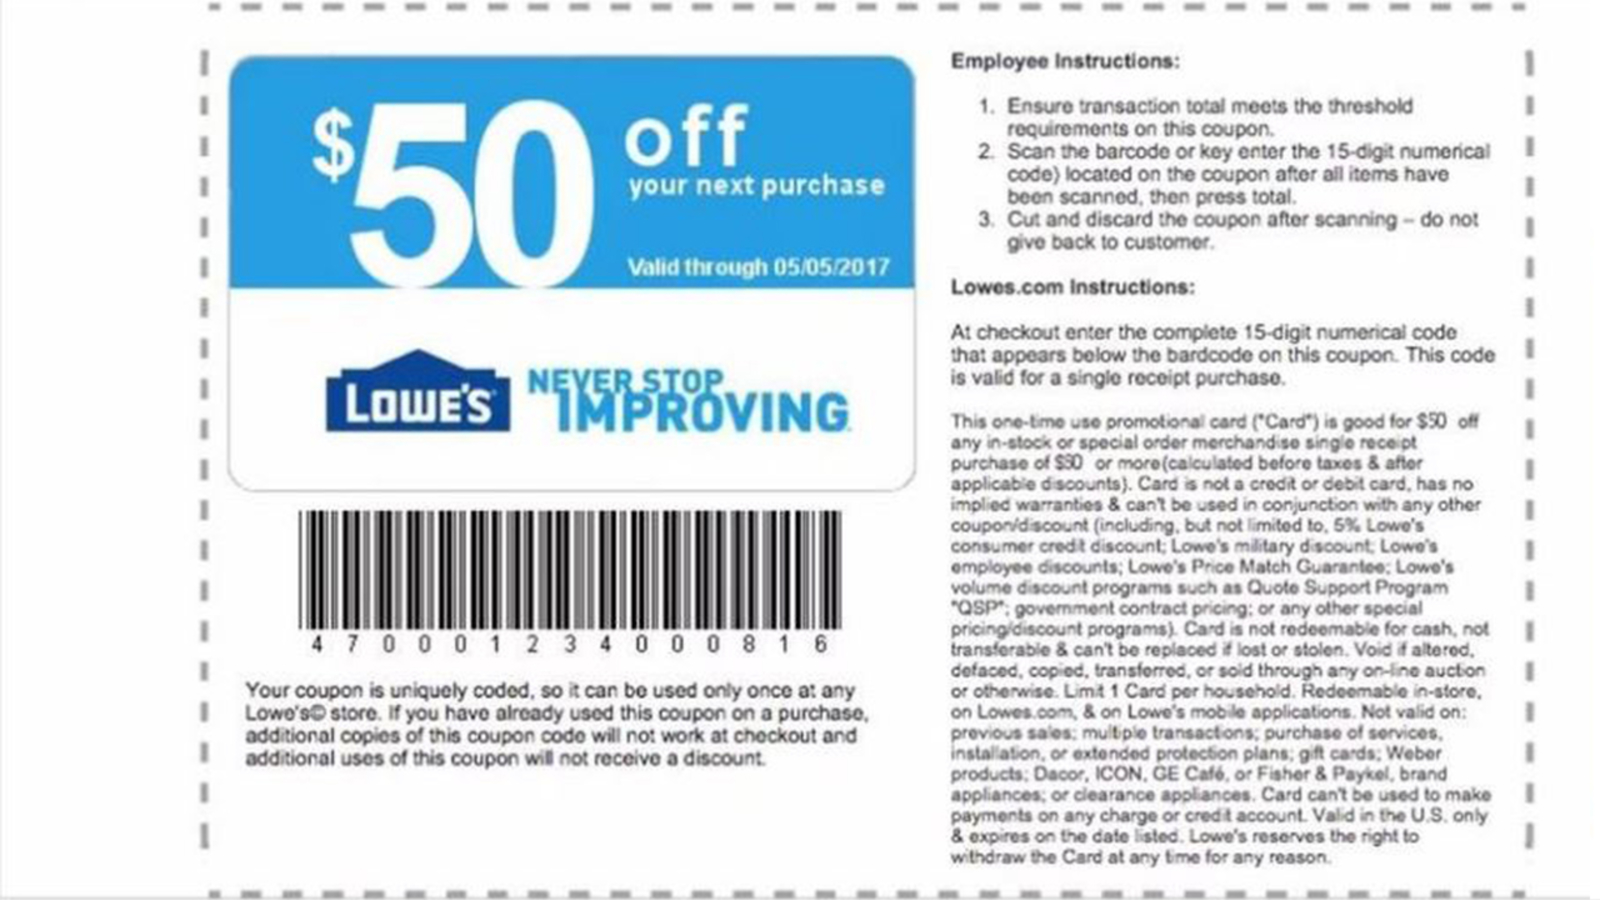 Stay up close with the lowes military discount and its benefits